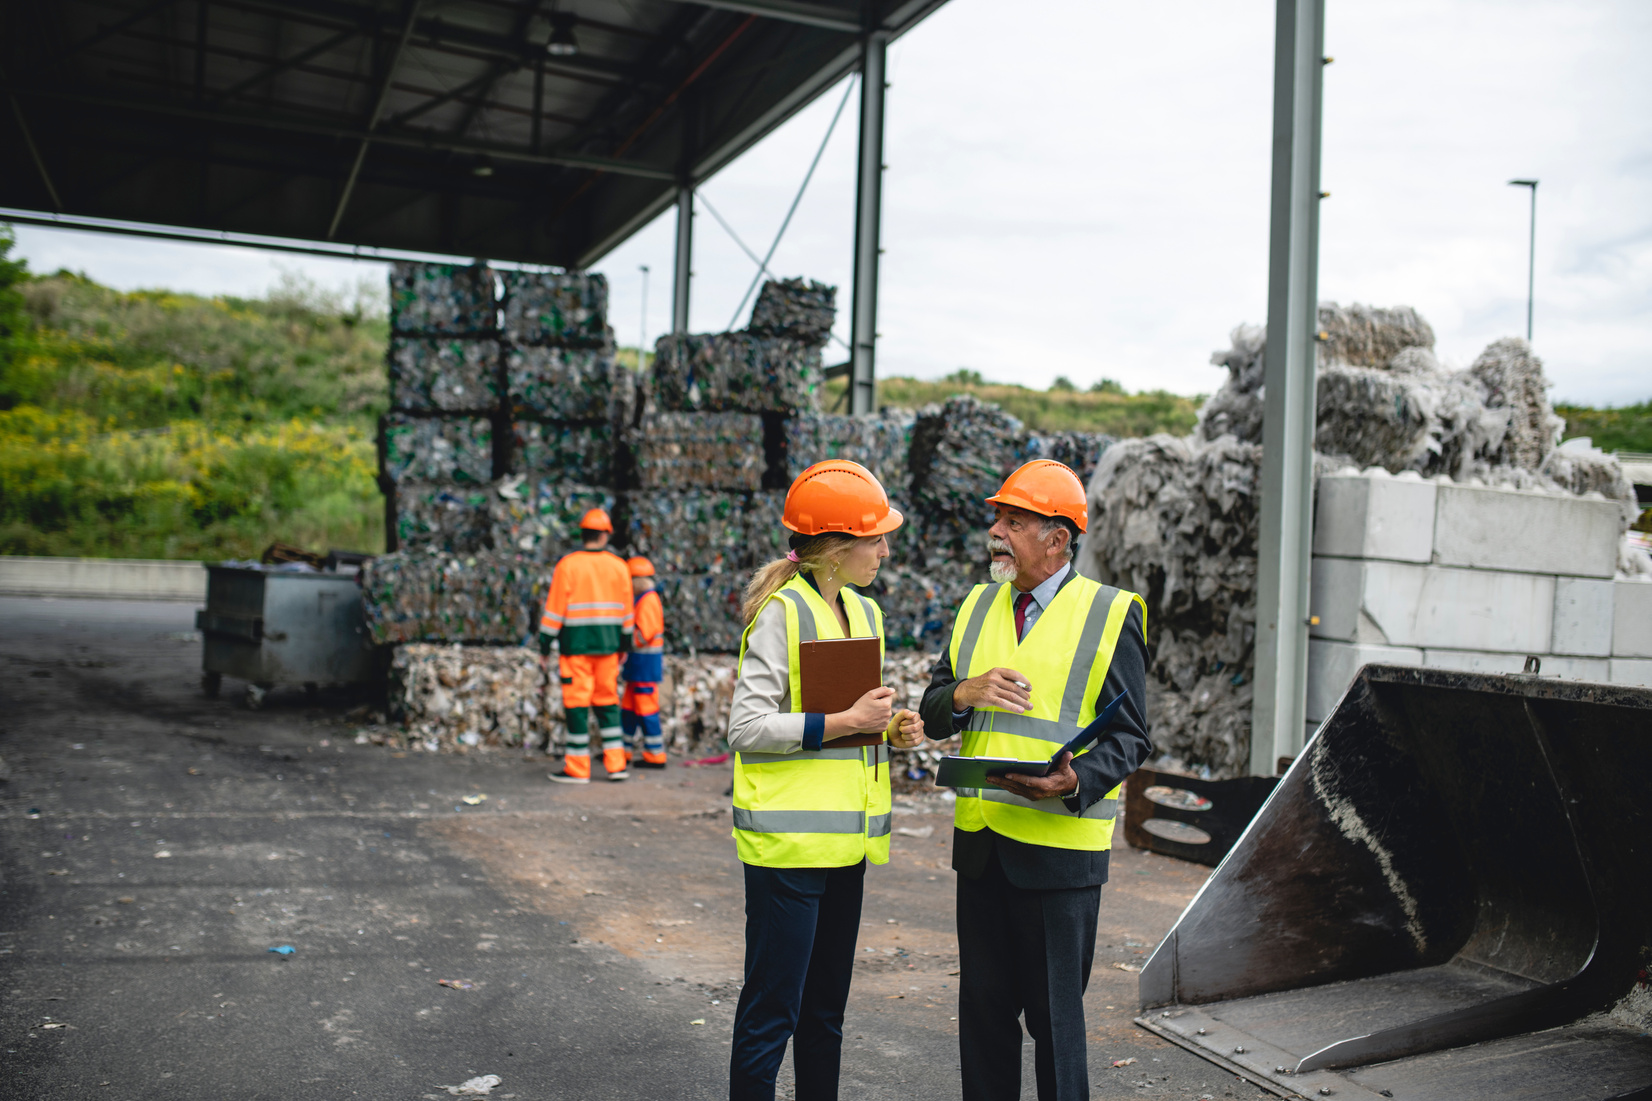 Managers and Workers Outdoors at Waste Management Facility